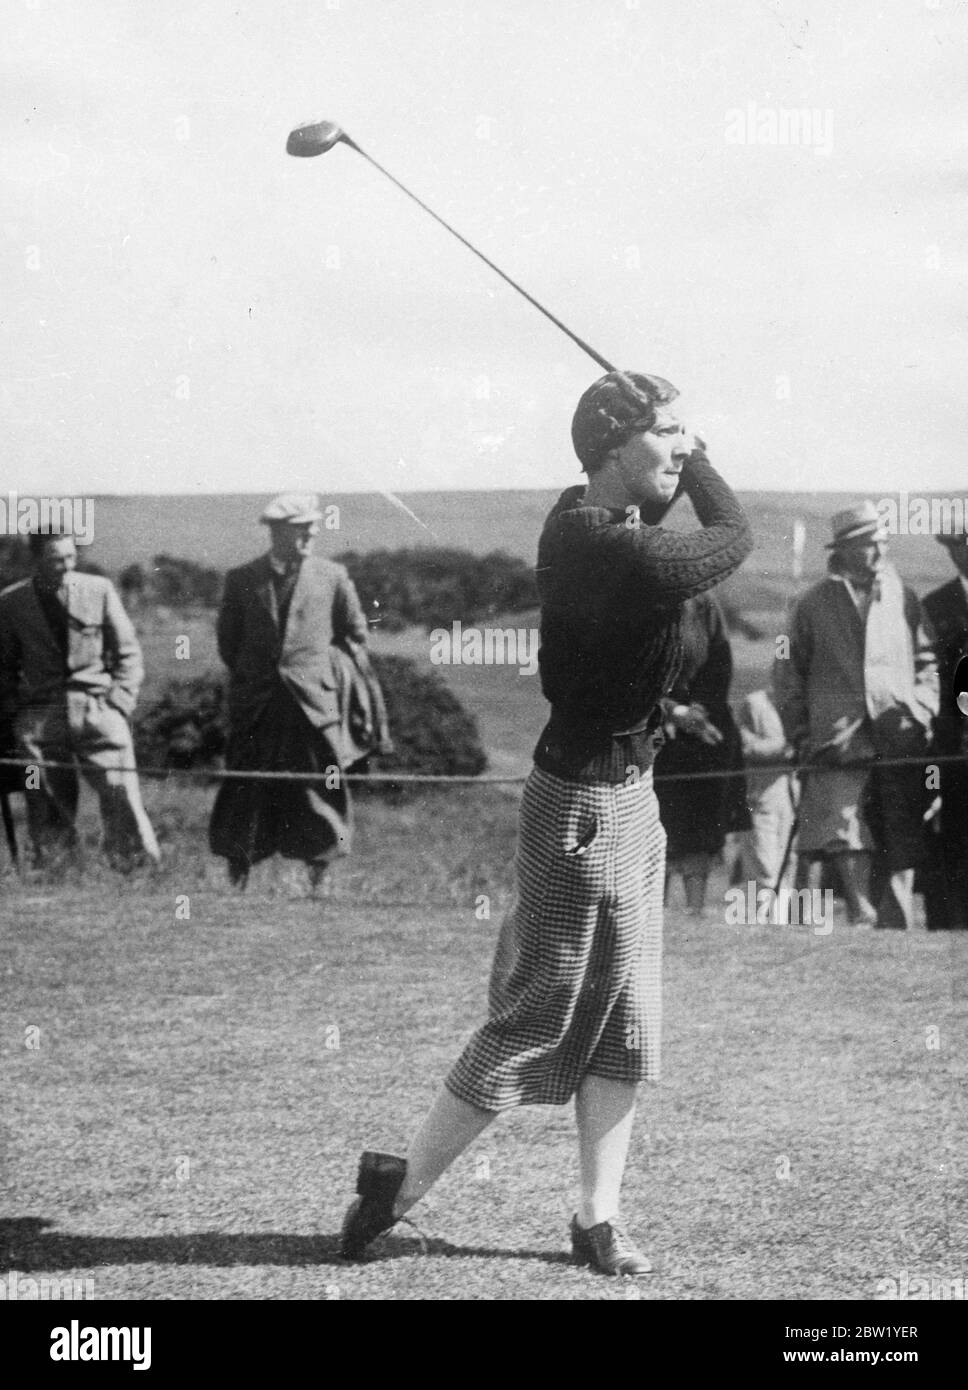 Miss Anderson wins British Women's Golf Championship. Miss Jessie Anderson, the 22-year-old Perth golfer, won the British Women's Golf Championships by defeating Miss Doris Park, 6 and 4 at Turnberry, Ayrshire. Photo shows, Miss Jessie Anderson, the new British women's champion, in play during the tournament. 11 June 1937 Stock Photo